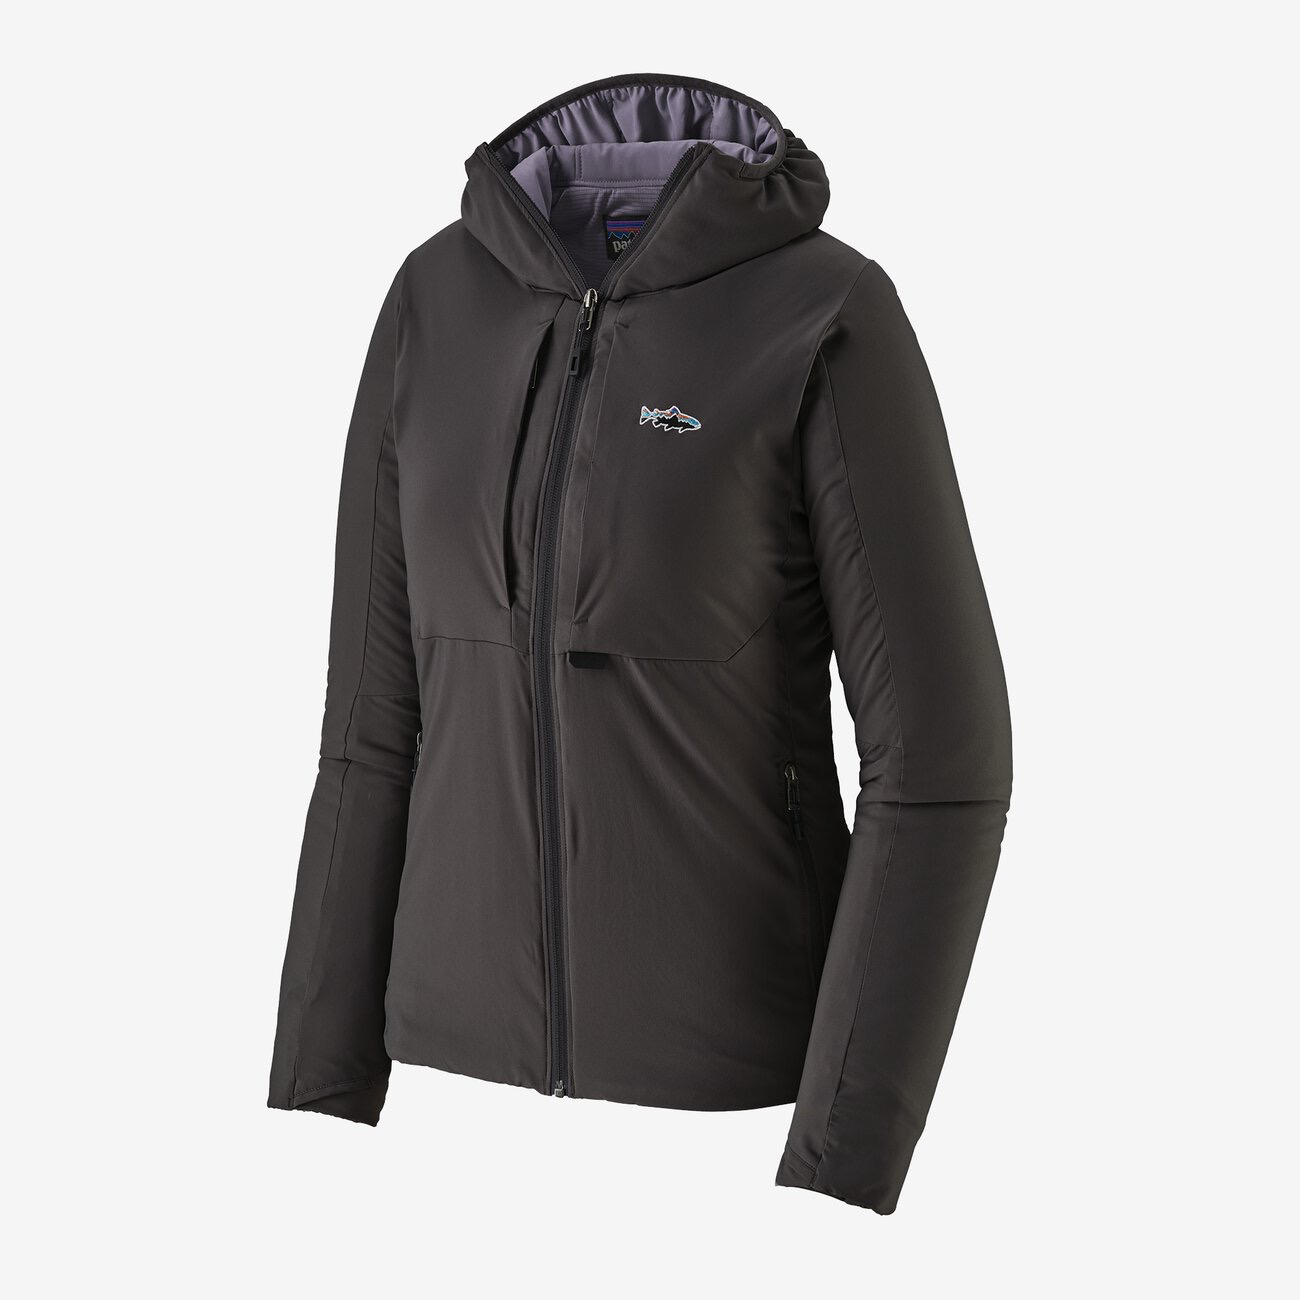 Patagonia W's Tough Puff Hoody - Ink Black - Small